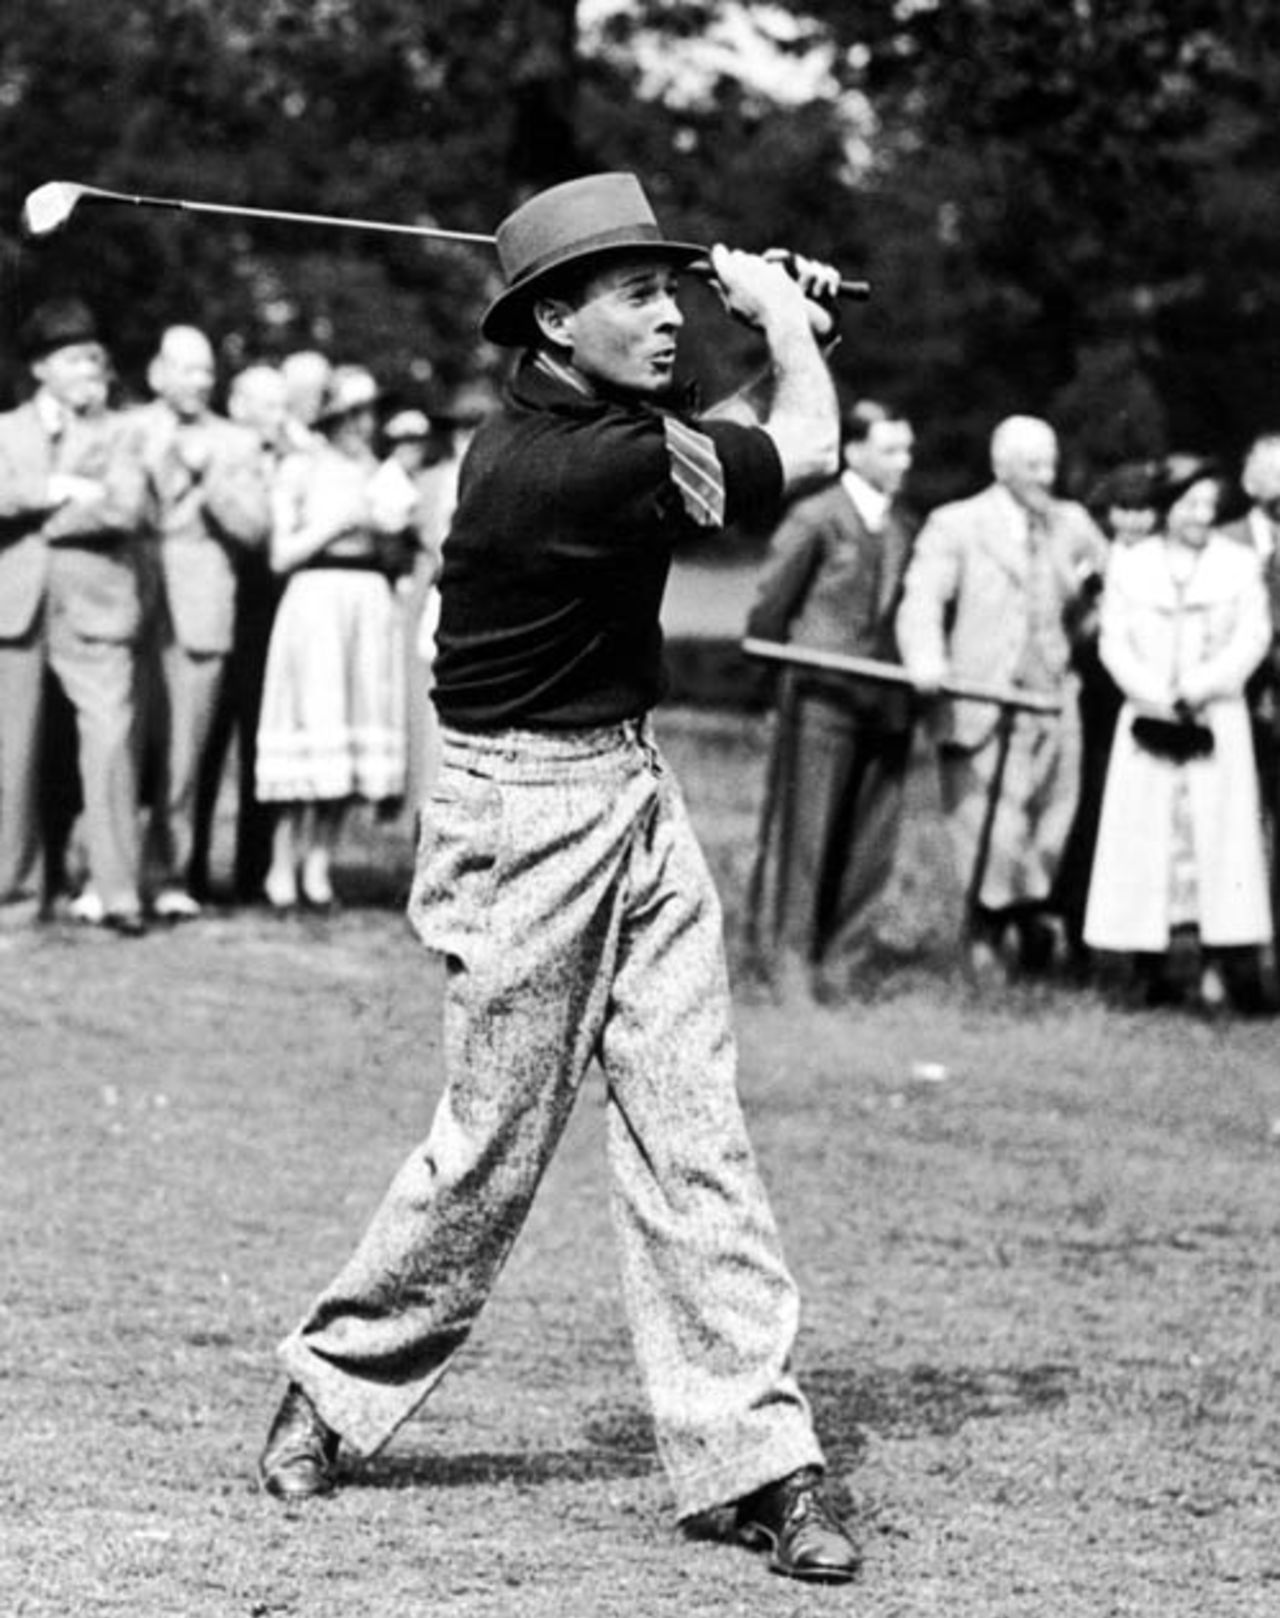 Jack Fingleton plays a round of golf at the West Kent Golf Club, Bickley, May 23, 1938